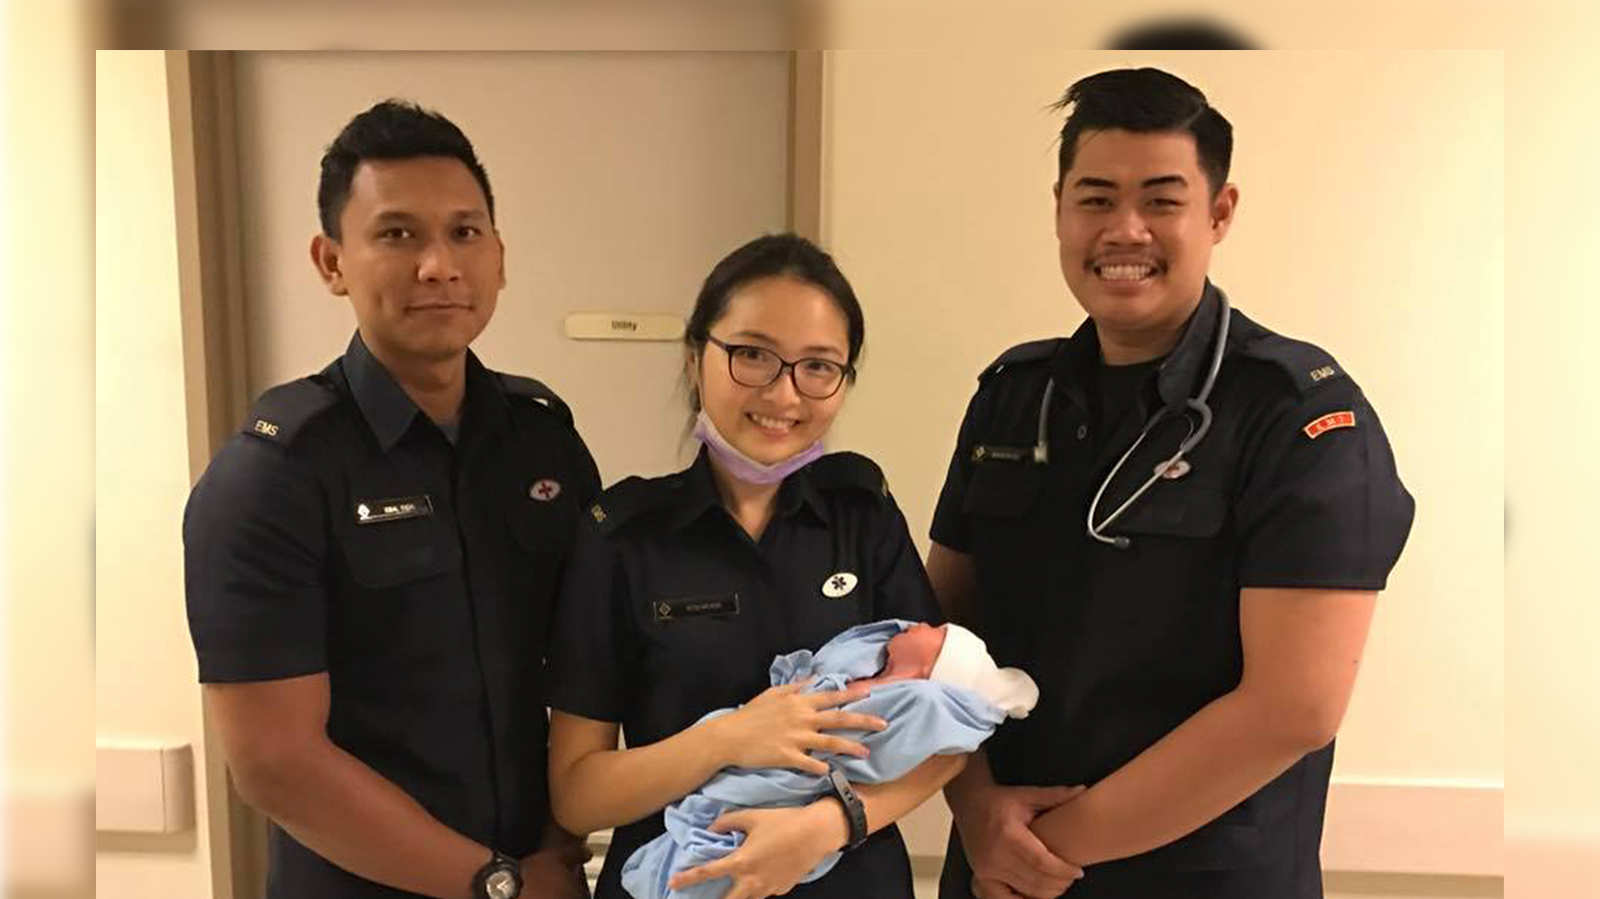 SCDF officers’ quick thinking ensured safe delivery of baby in HDB flat